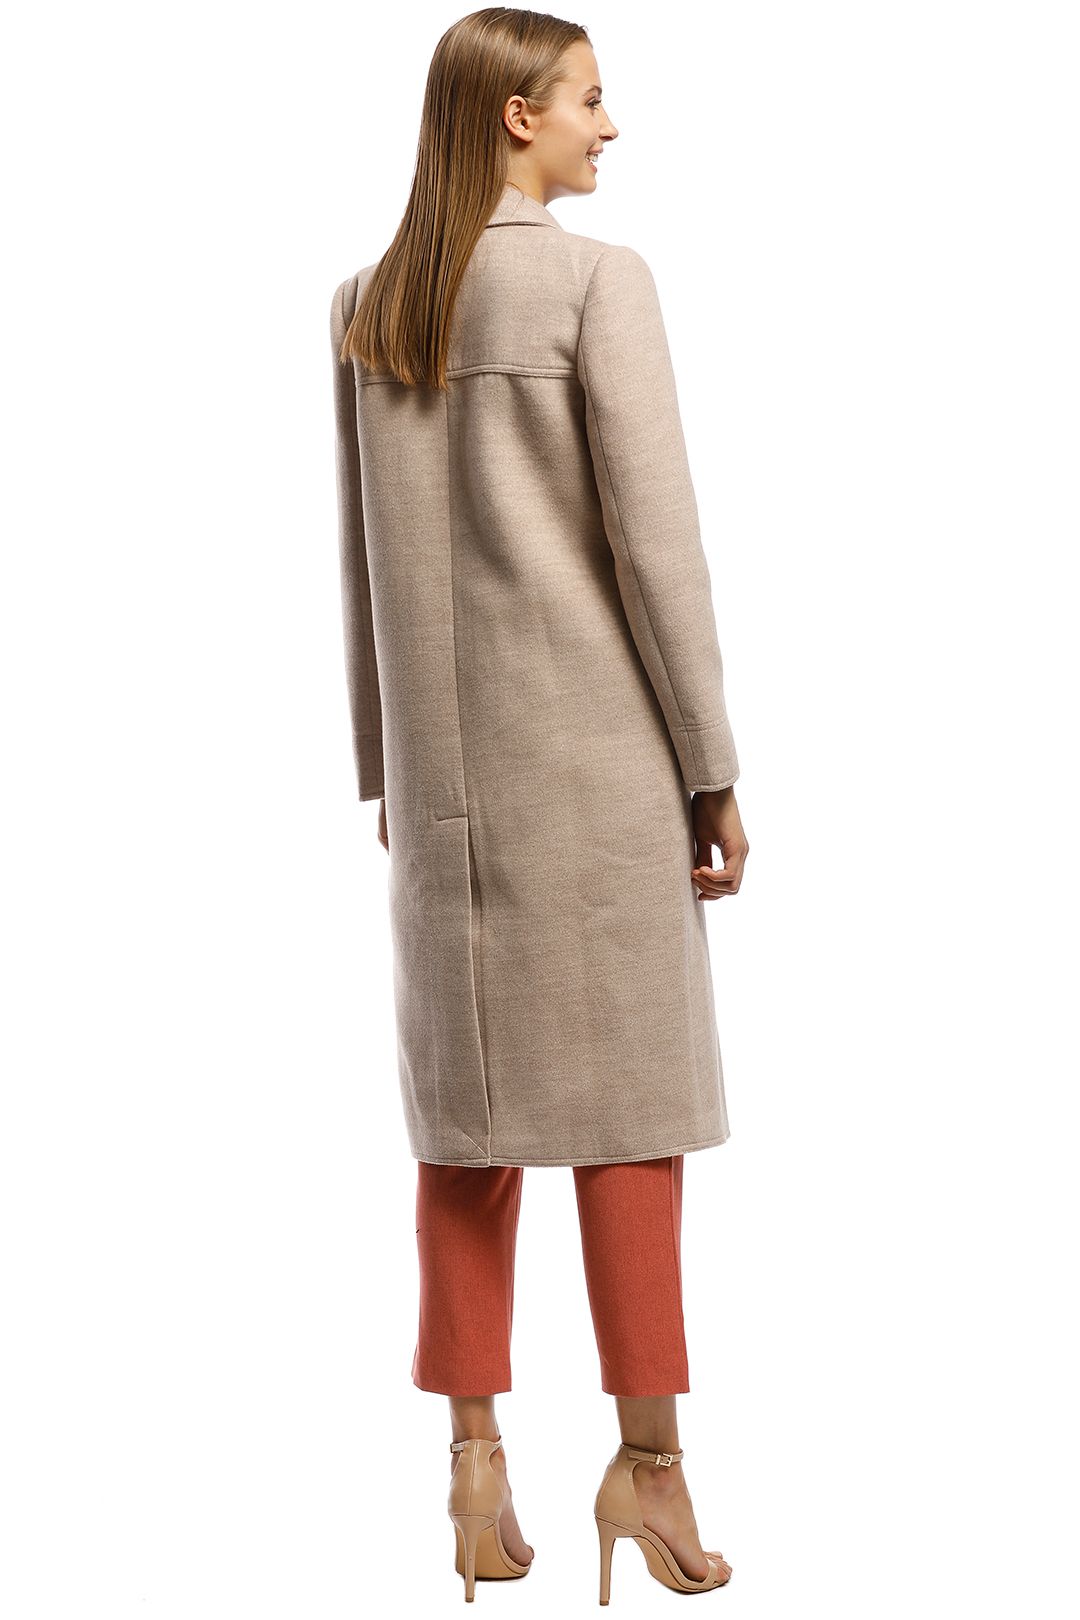 CMEO Collective - Held Up Coat - Brown - Back